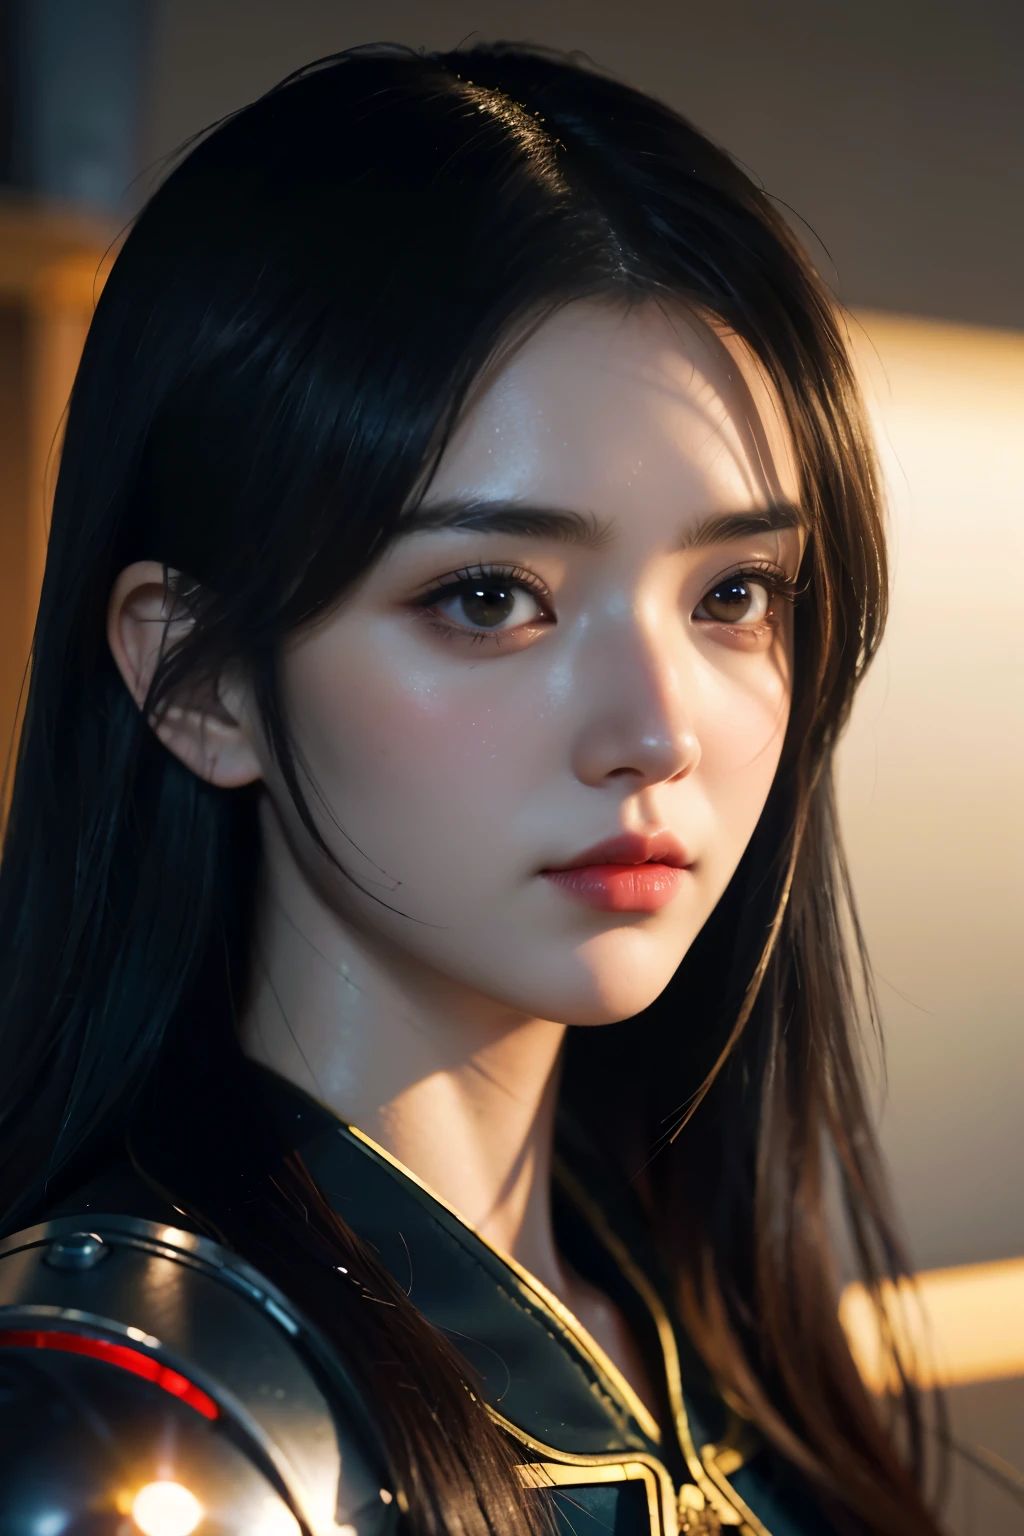 Game art，The best picture quality，Highest resolution，8K，((A bust photograph))，((Portrait))，((Head close-up:1.5))，(Rule of thirds)，Unreal Engine 5 rendering works， (The Girl of the Future)，(Female Warrior)， 22-year-old girl，(Female hackers)，(Ancient Oriental hairstyle)，((The pupils of the red eyes:1.3))，(A beautiful eye full of detail)，(Big breasts)，(Eye shadow)，Elegant and charming，indifferent，((Anger))，(Future style silk combat suit combined with the characteristics of Chinese cheongsam，Joint Armor，There are exquisite Chinese patterns on the clothes，A flash of jewellery)，Cyberpunk Characters，Future Style， Photo poses，City background，Movie lights，Ray tracing，Game CG，((3D Unreal Engine))，oc rendering reflection pattern